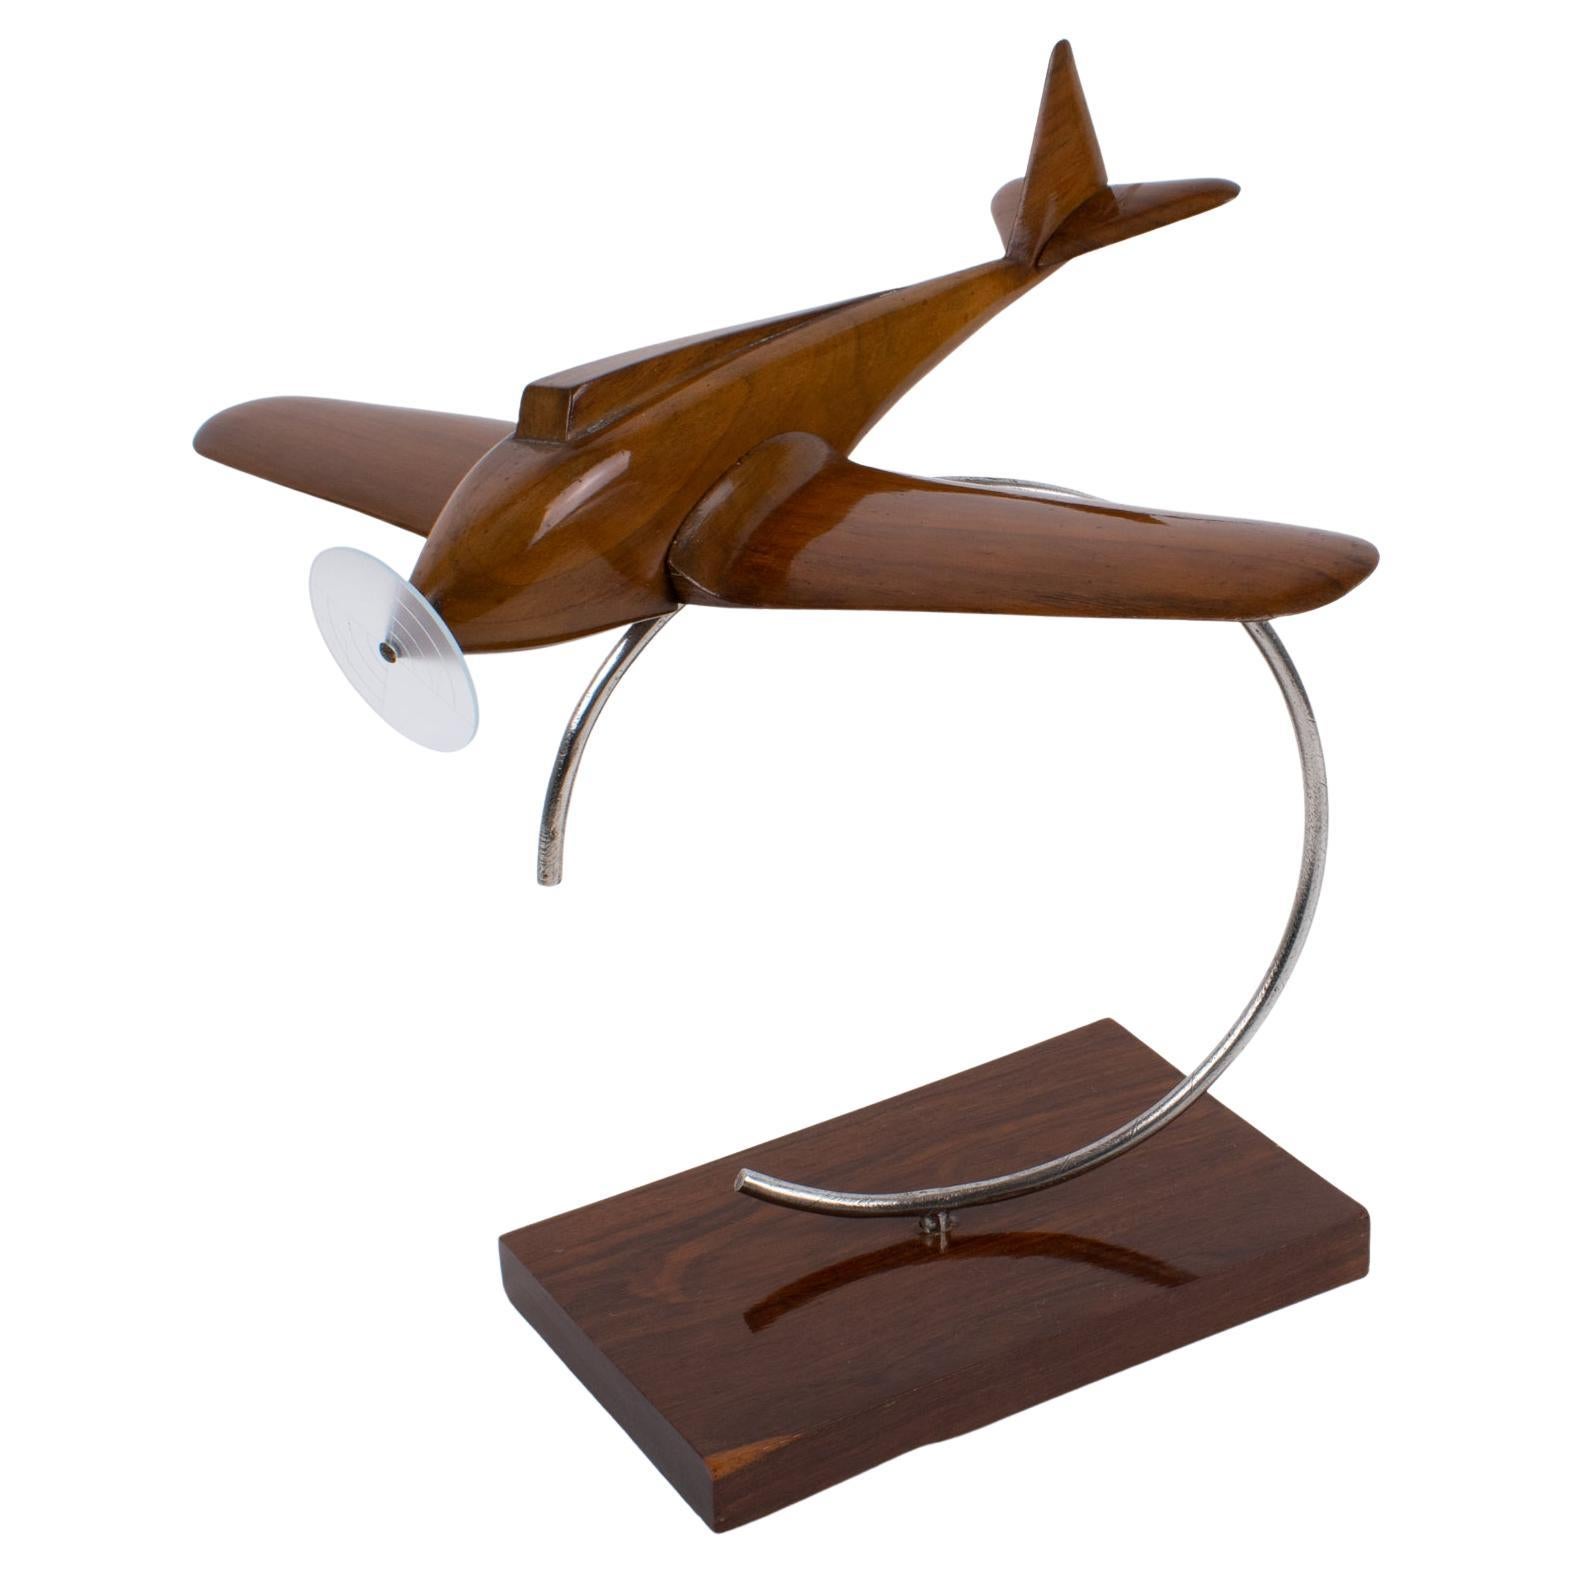 Art Deco Wooden Airplane Aviation Model, France 1930s